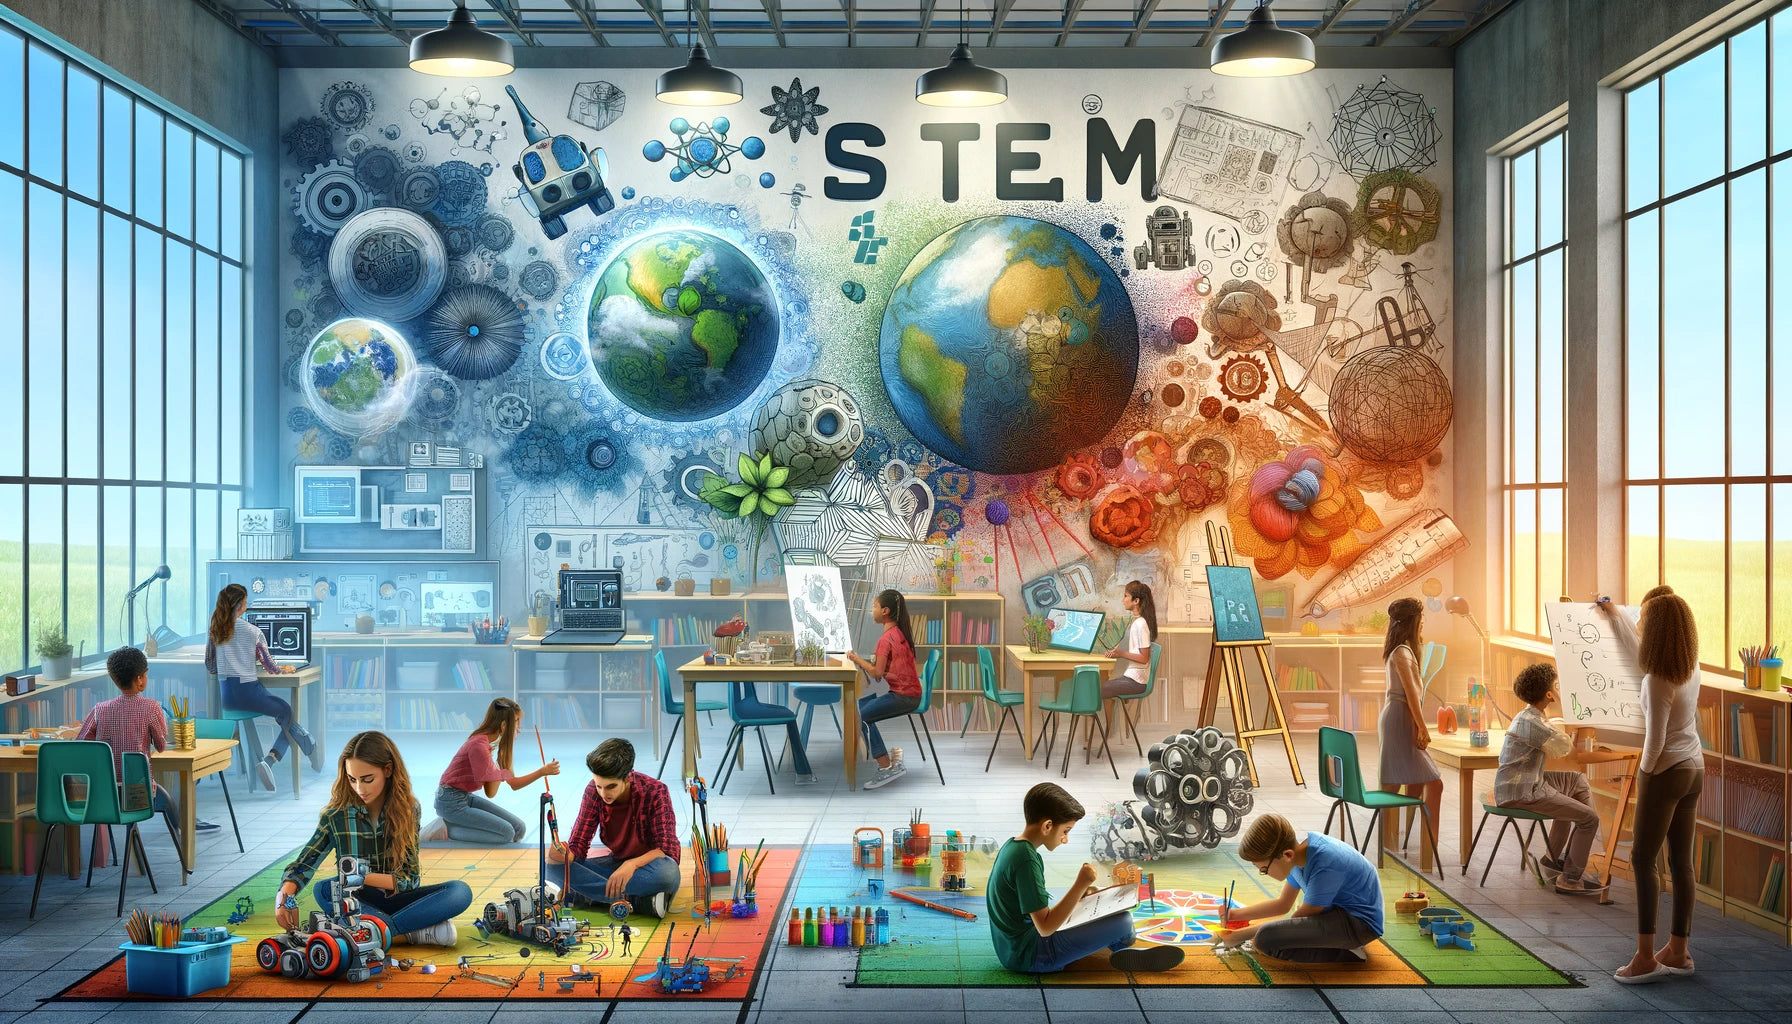 Should Arts be Added to STEM?